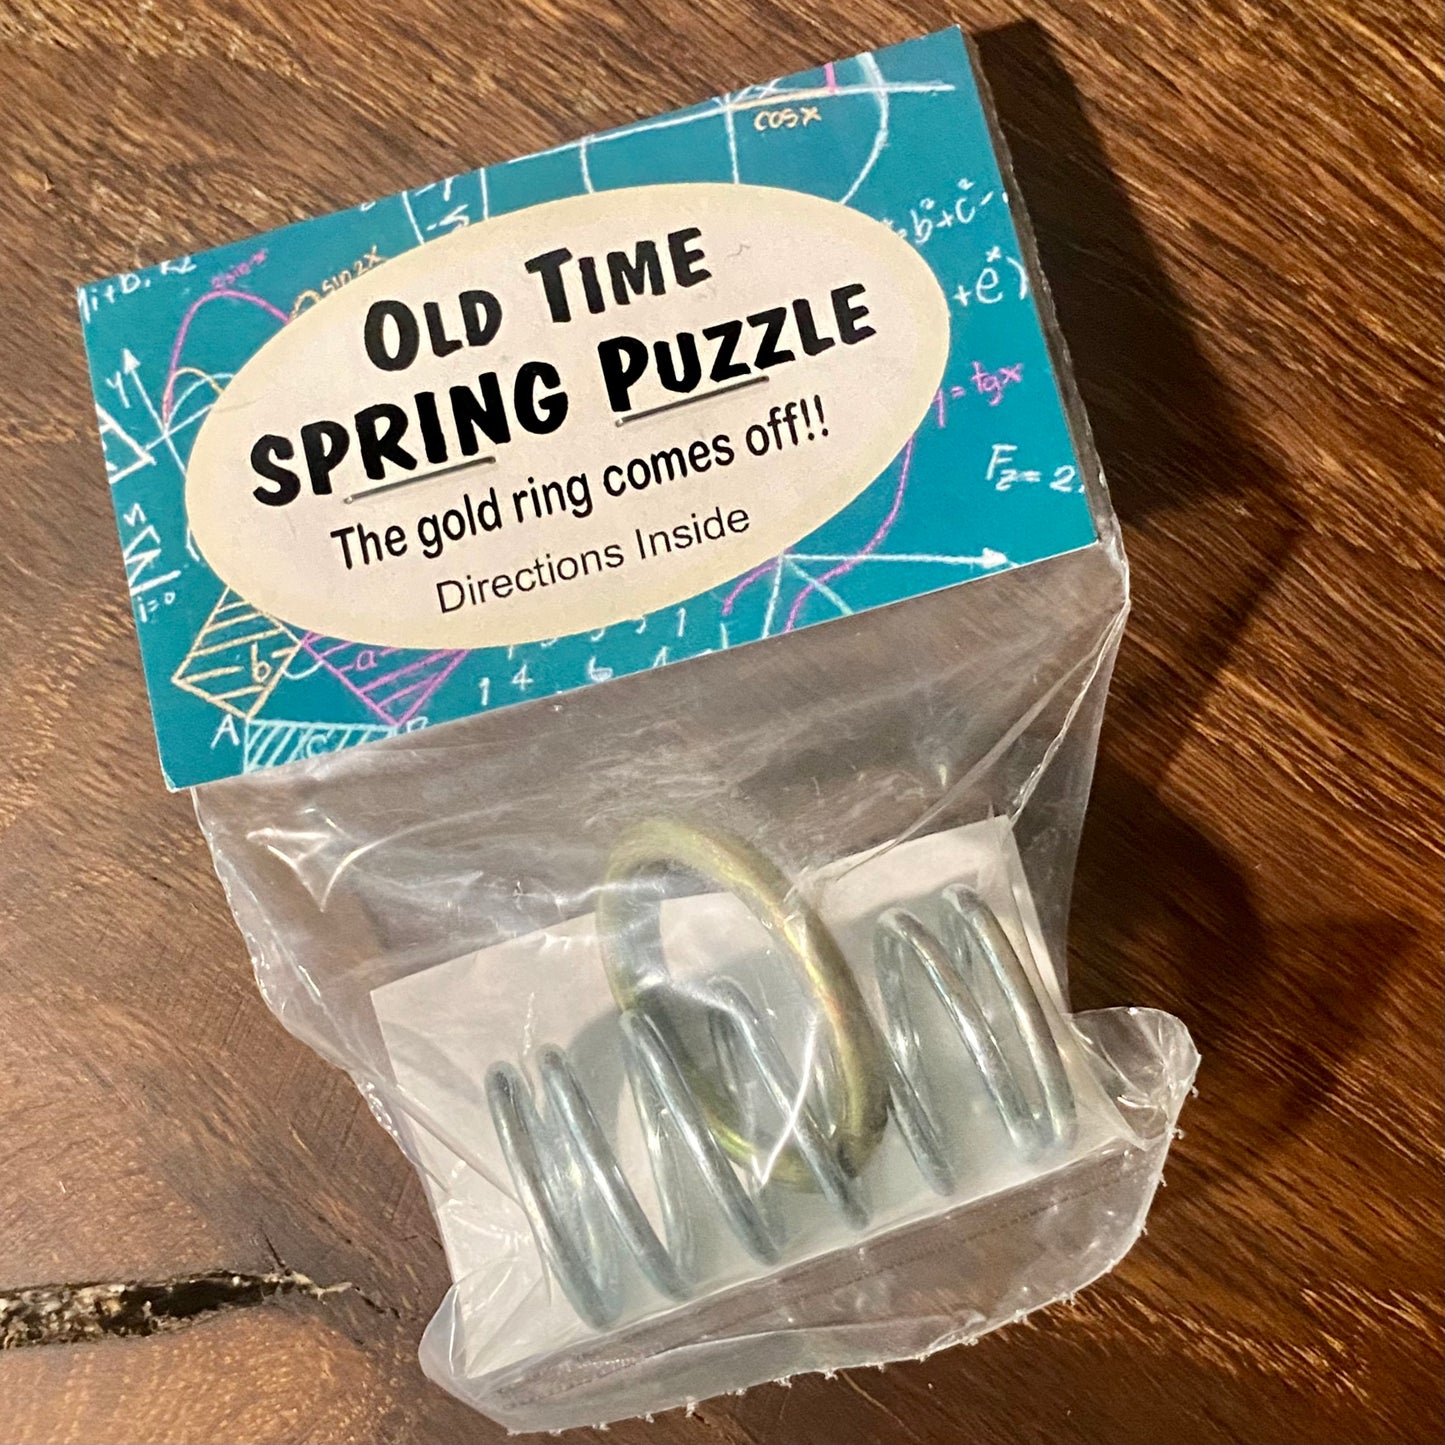 Old Time Spring Puzzle